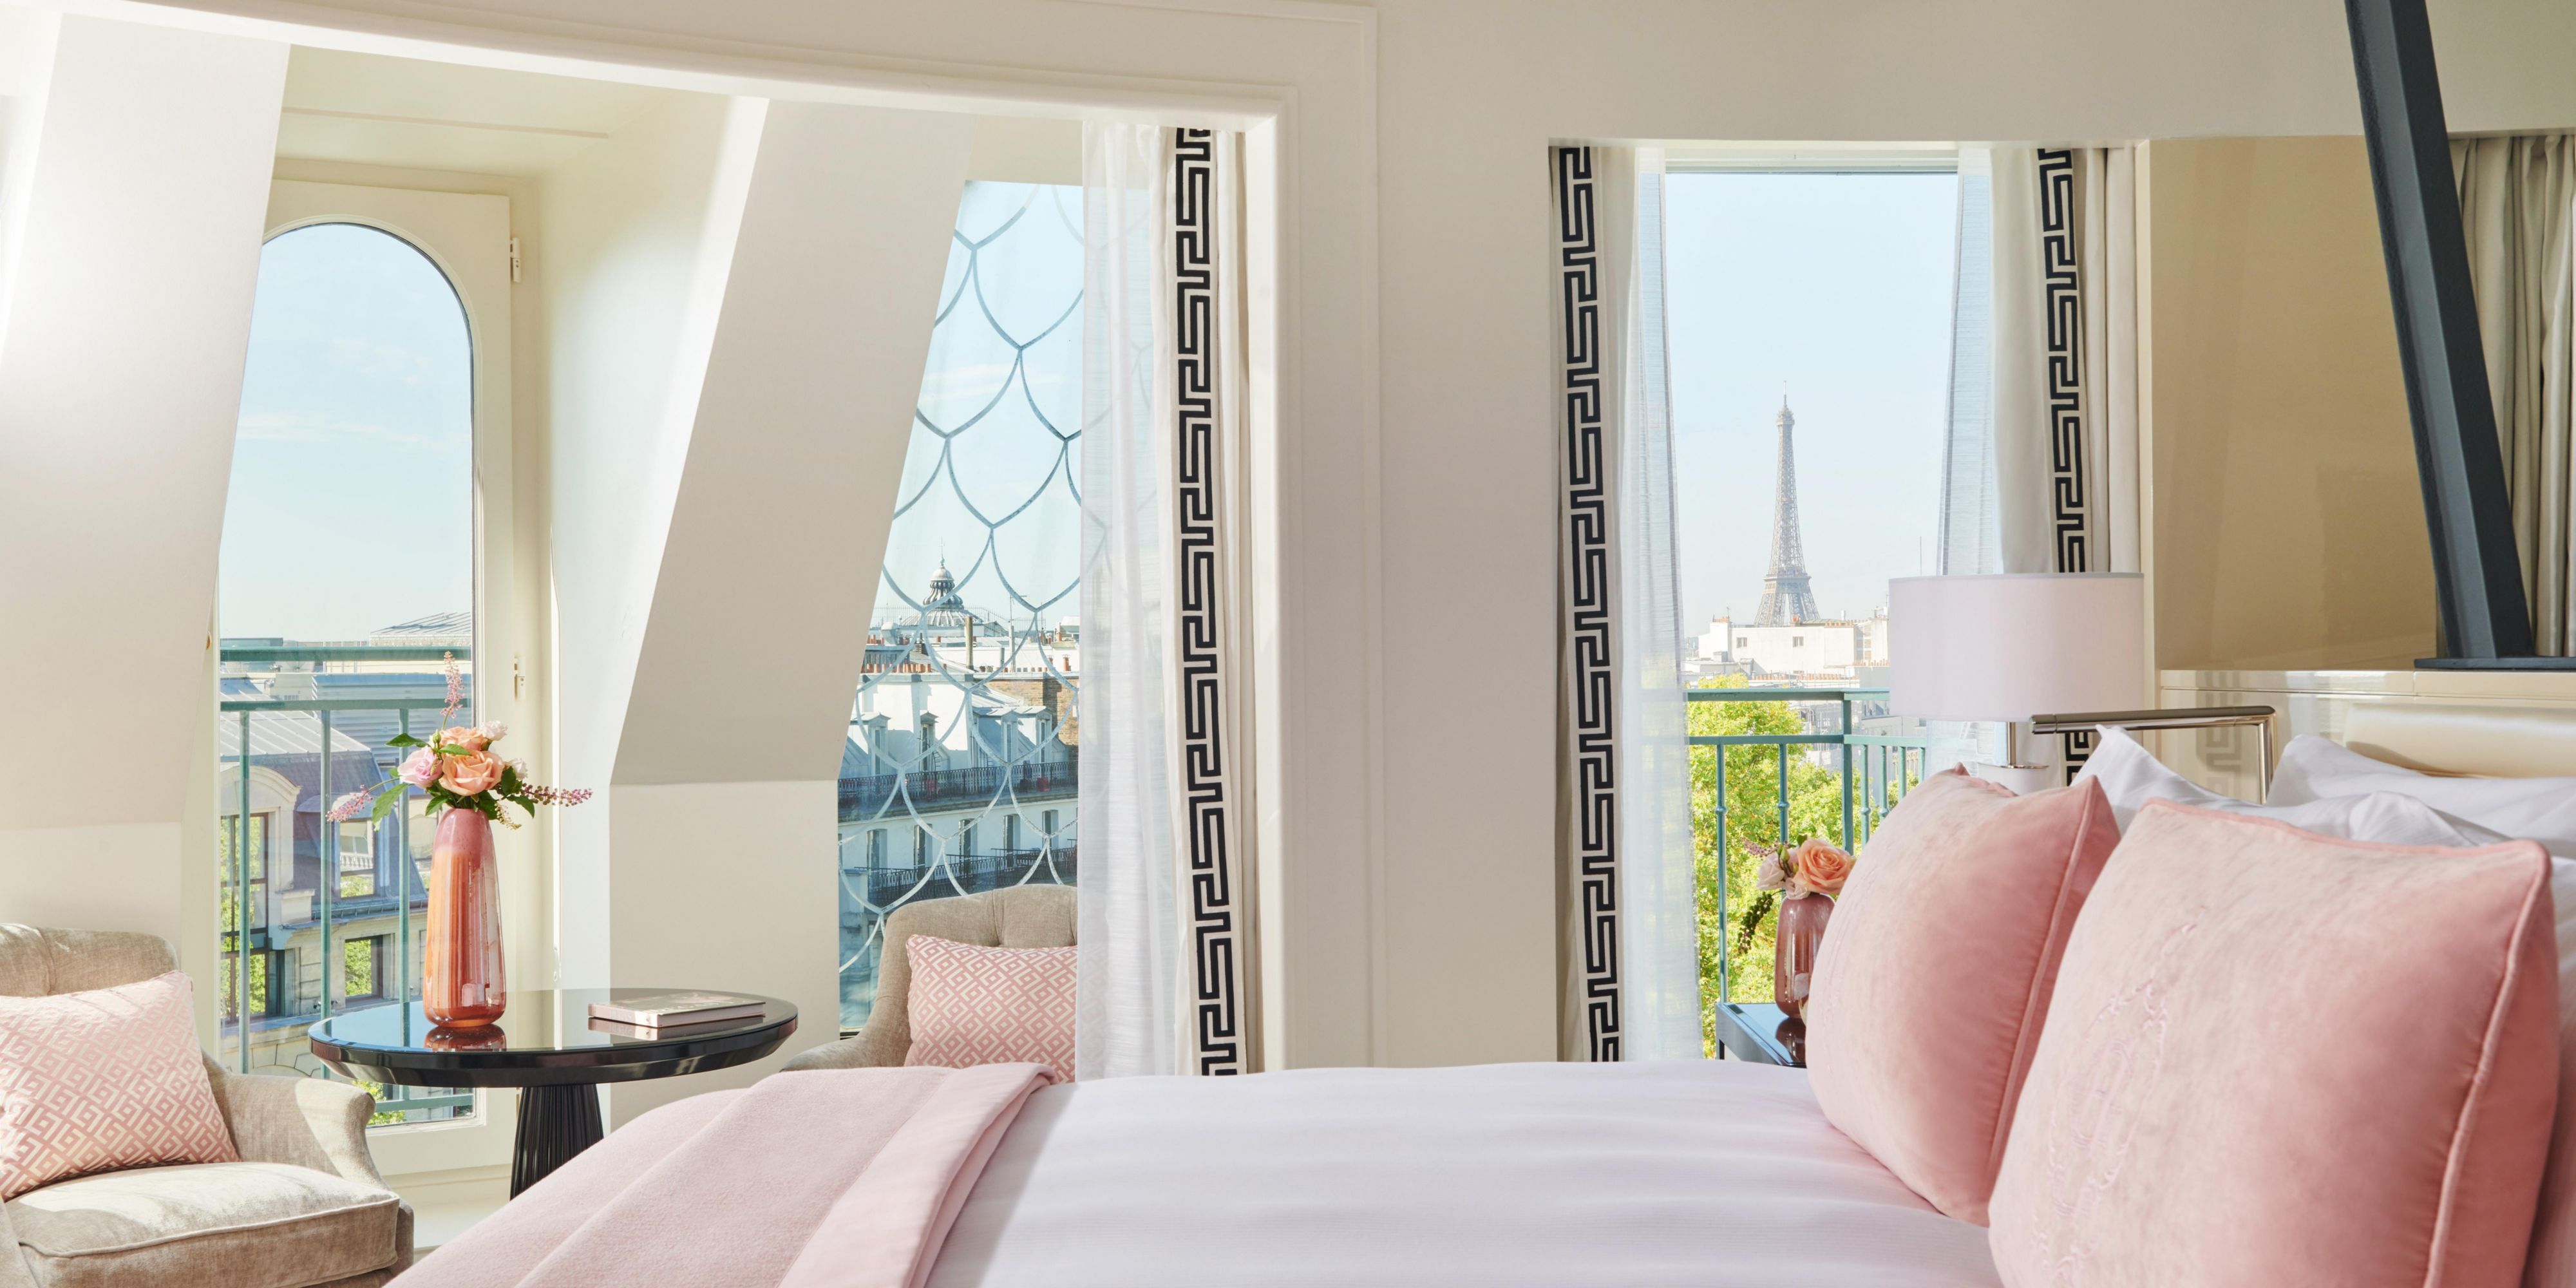 The Signature Suites are about cosy comfort and confidentiality, offering the ultimate luxury. With a breath-taking panoramic view over the roof of the Opera Garnier or the Eiffel tower, they are a peaceful haven with a chic contemporary feel.